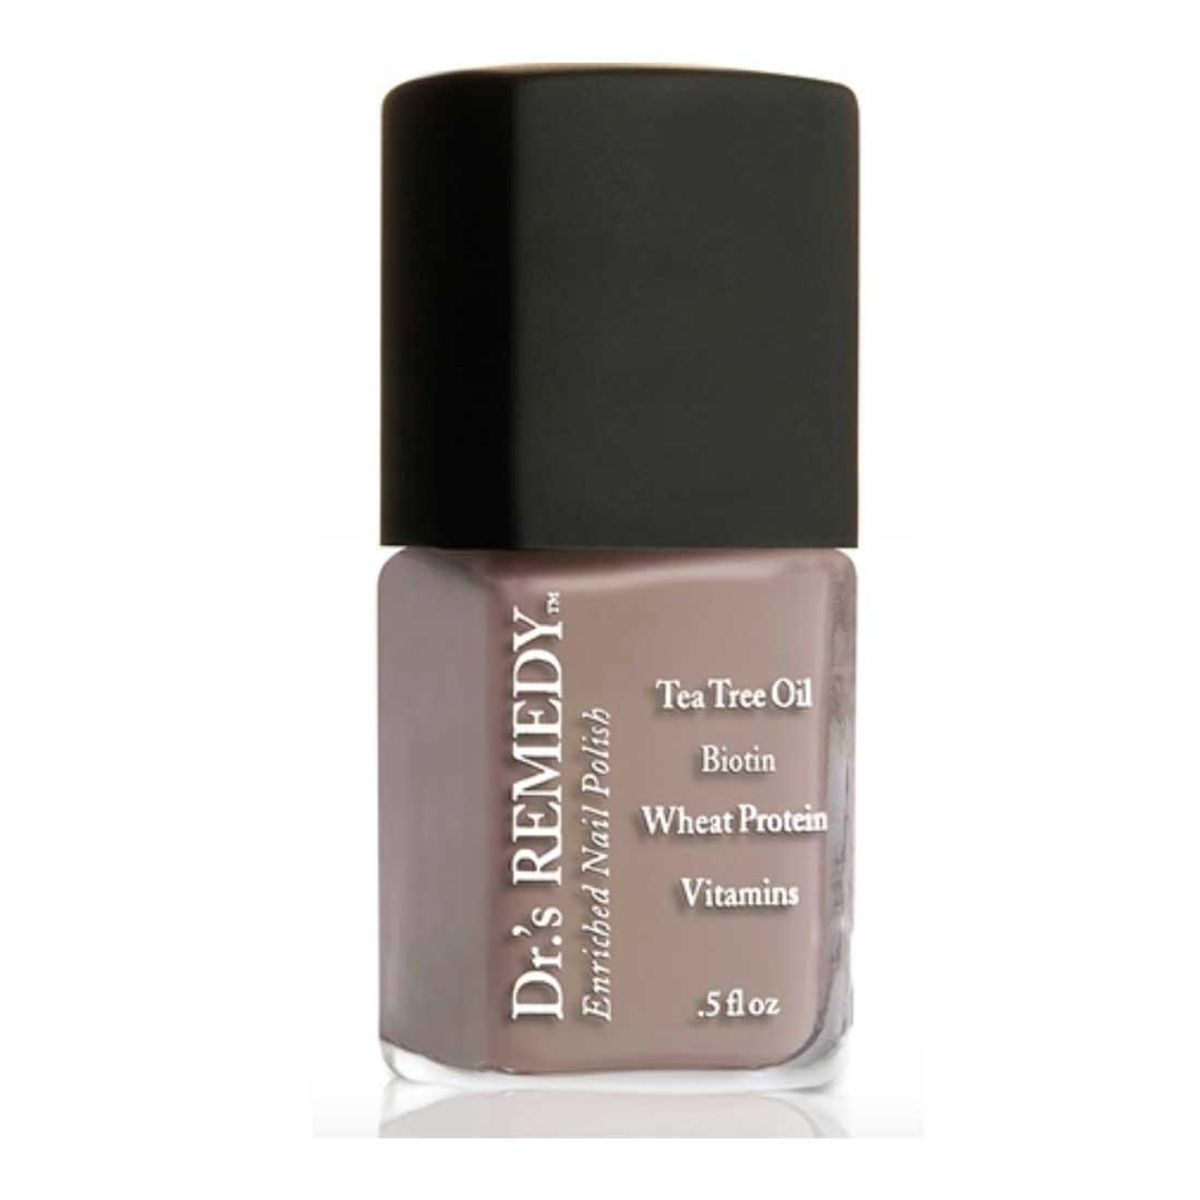 drs remedy nail care cozy cafe enriched nail polish 